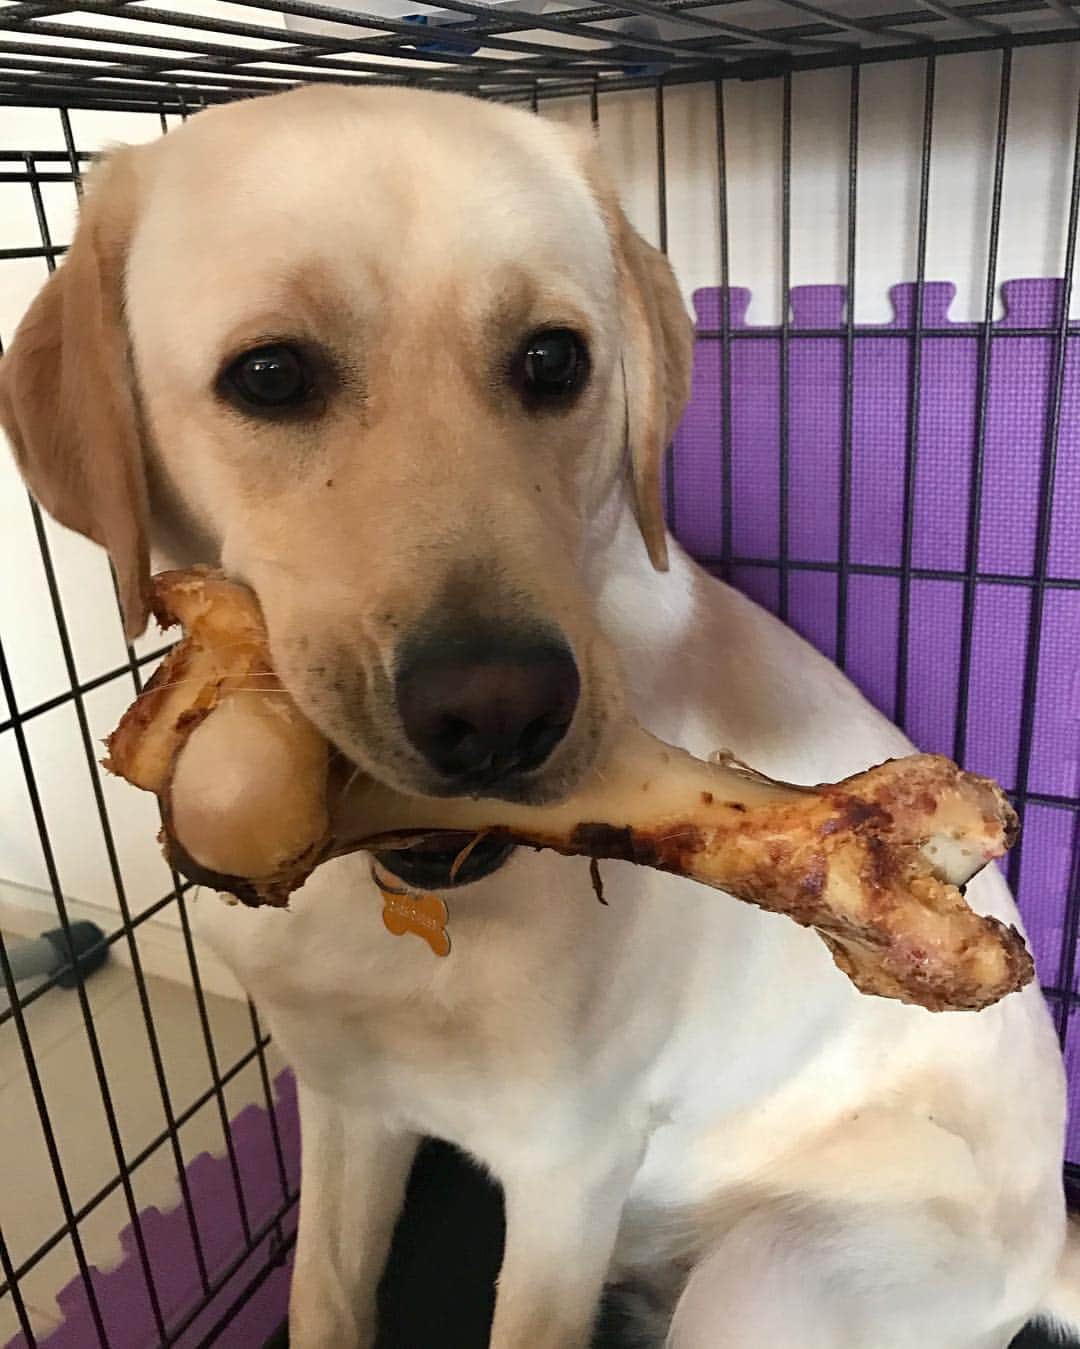 Rocky the Labのインスタグラム：「When your humans come home with your favourite treat!!! 😍  #EnglishLabrador #LabradorRetriever #labrador #labradorable #labradorlife #labradorlover #labradorpuppy #itsalabthing #ilovemylab #justlabradors #TalesOfALab #yellowlaboftheday #yellowlabrador #yellowlab #worldofmylab #worldoflabs #dogsofinstagram #petstagram #labradorsofinstagram #hungryforattention #dogsofinstagram #TopDogPhoto #labradoroftheday #spoilt #favouritetreat #lovesbones」